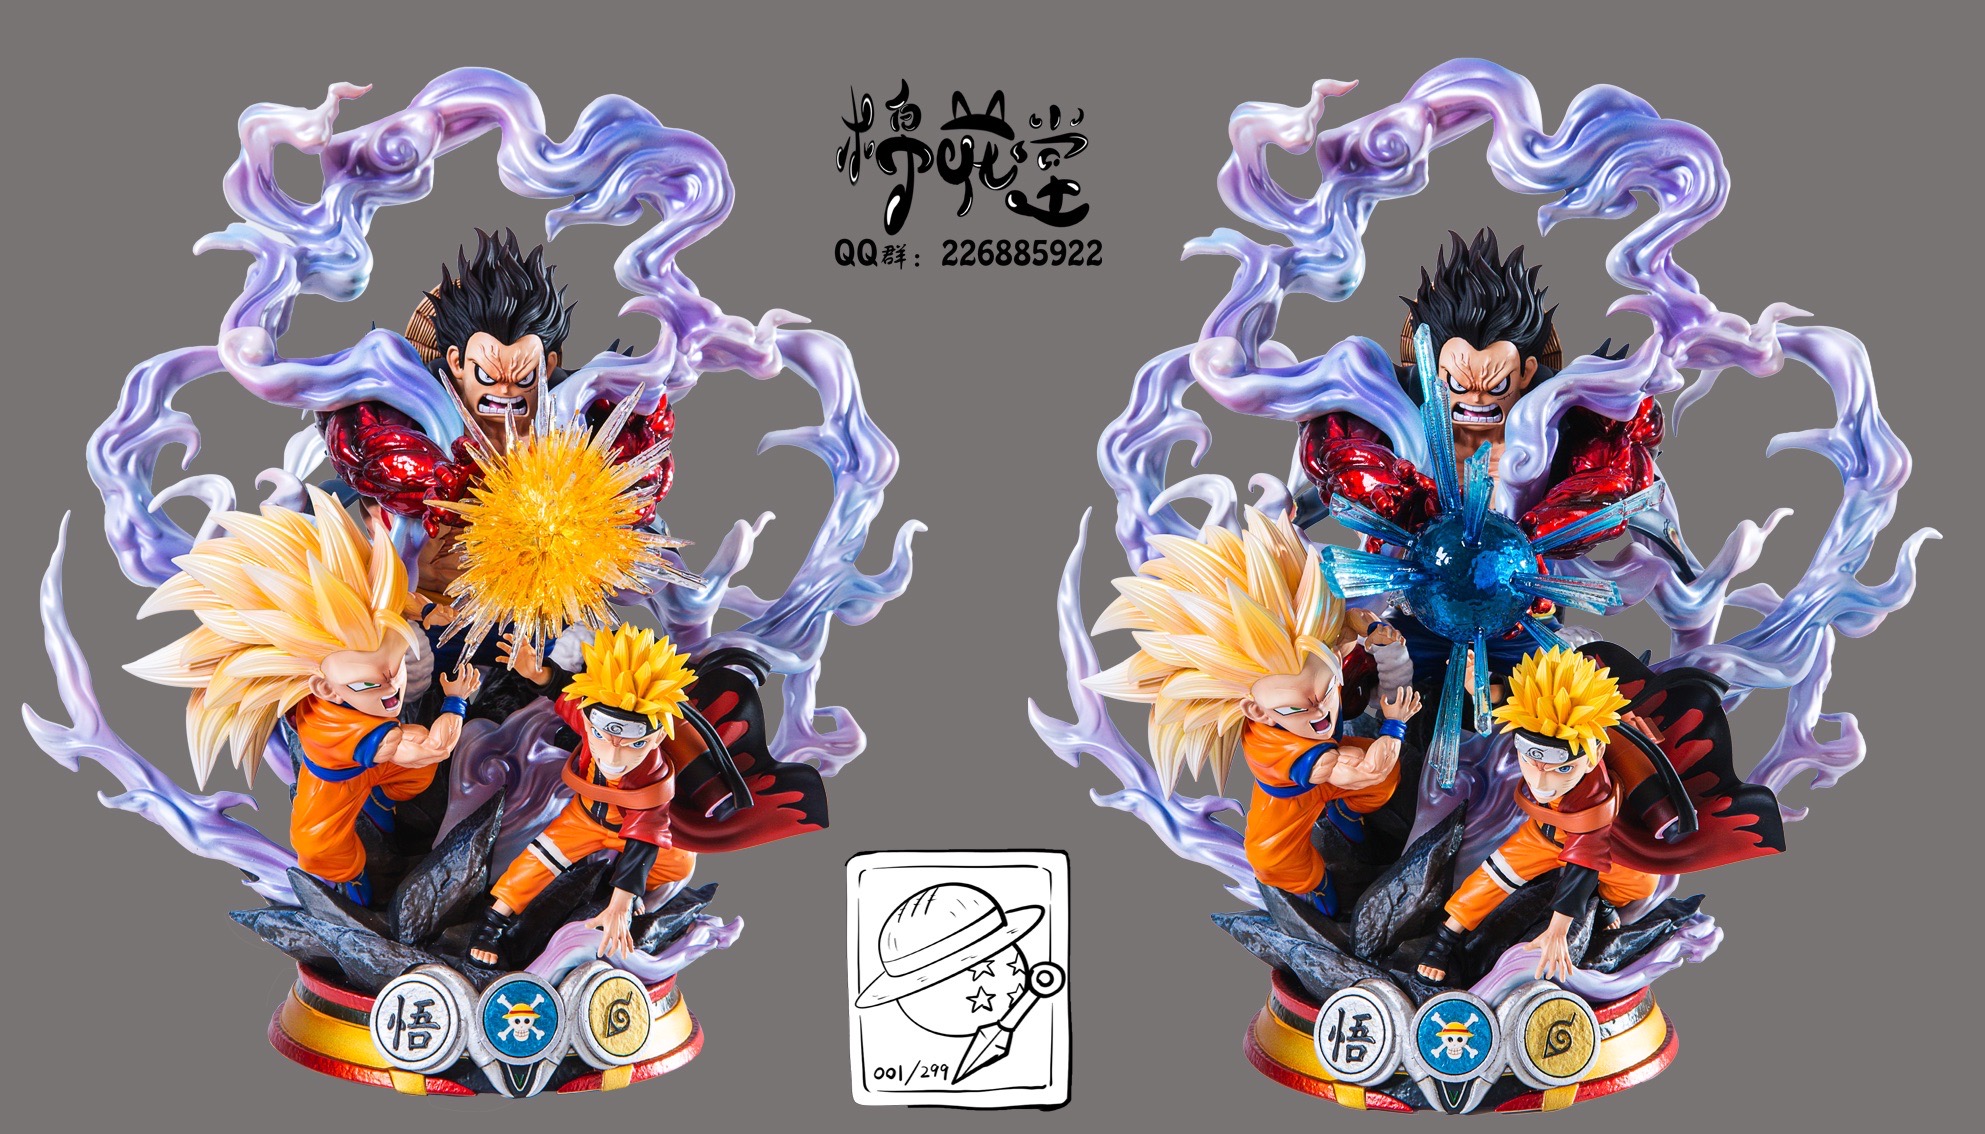 3 in 1 Onepiece Naruto Dragonball by Cotton Hall (มัดจำ) [[SOLD OUT]]